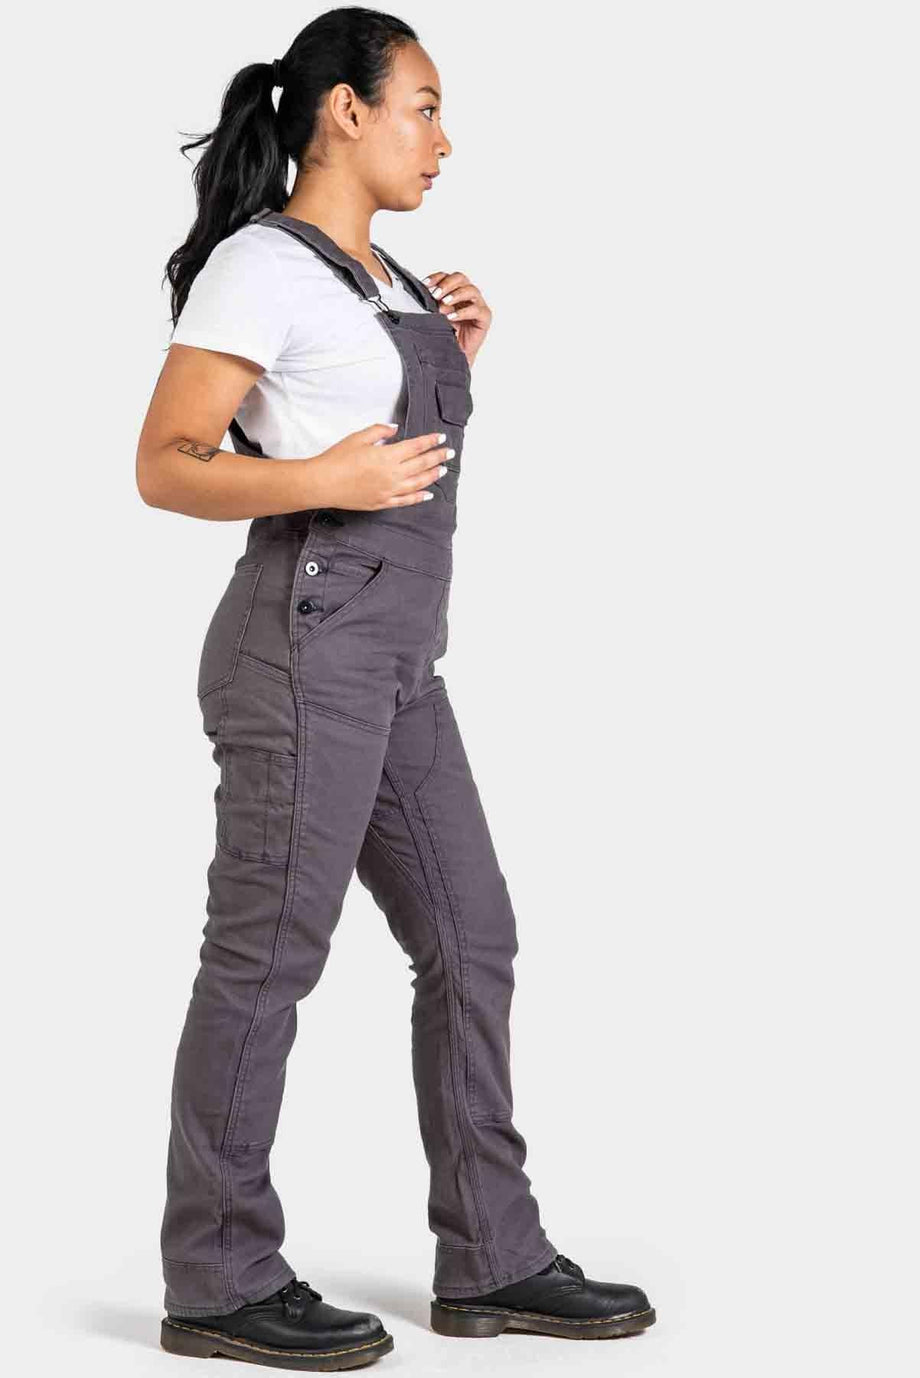 Dovetail Workwear Women's Grey Canvas Work Pants (16 X 30) in the